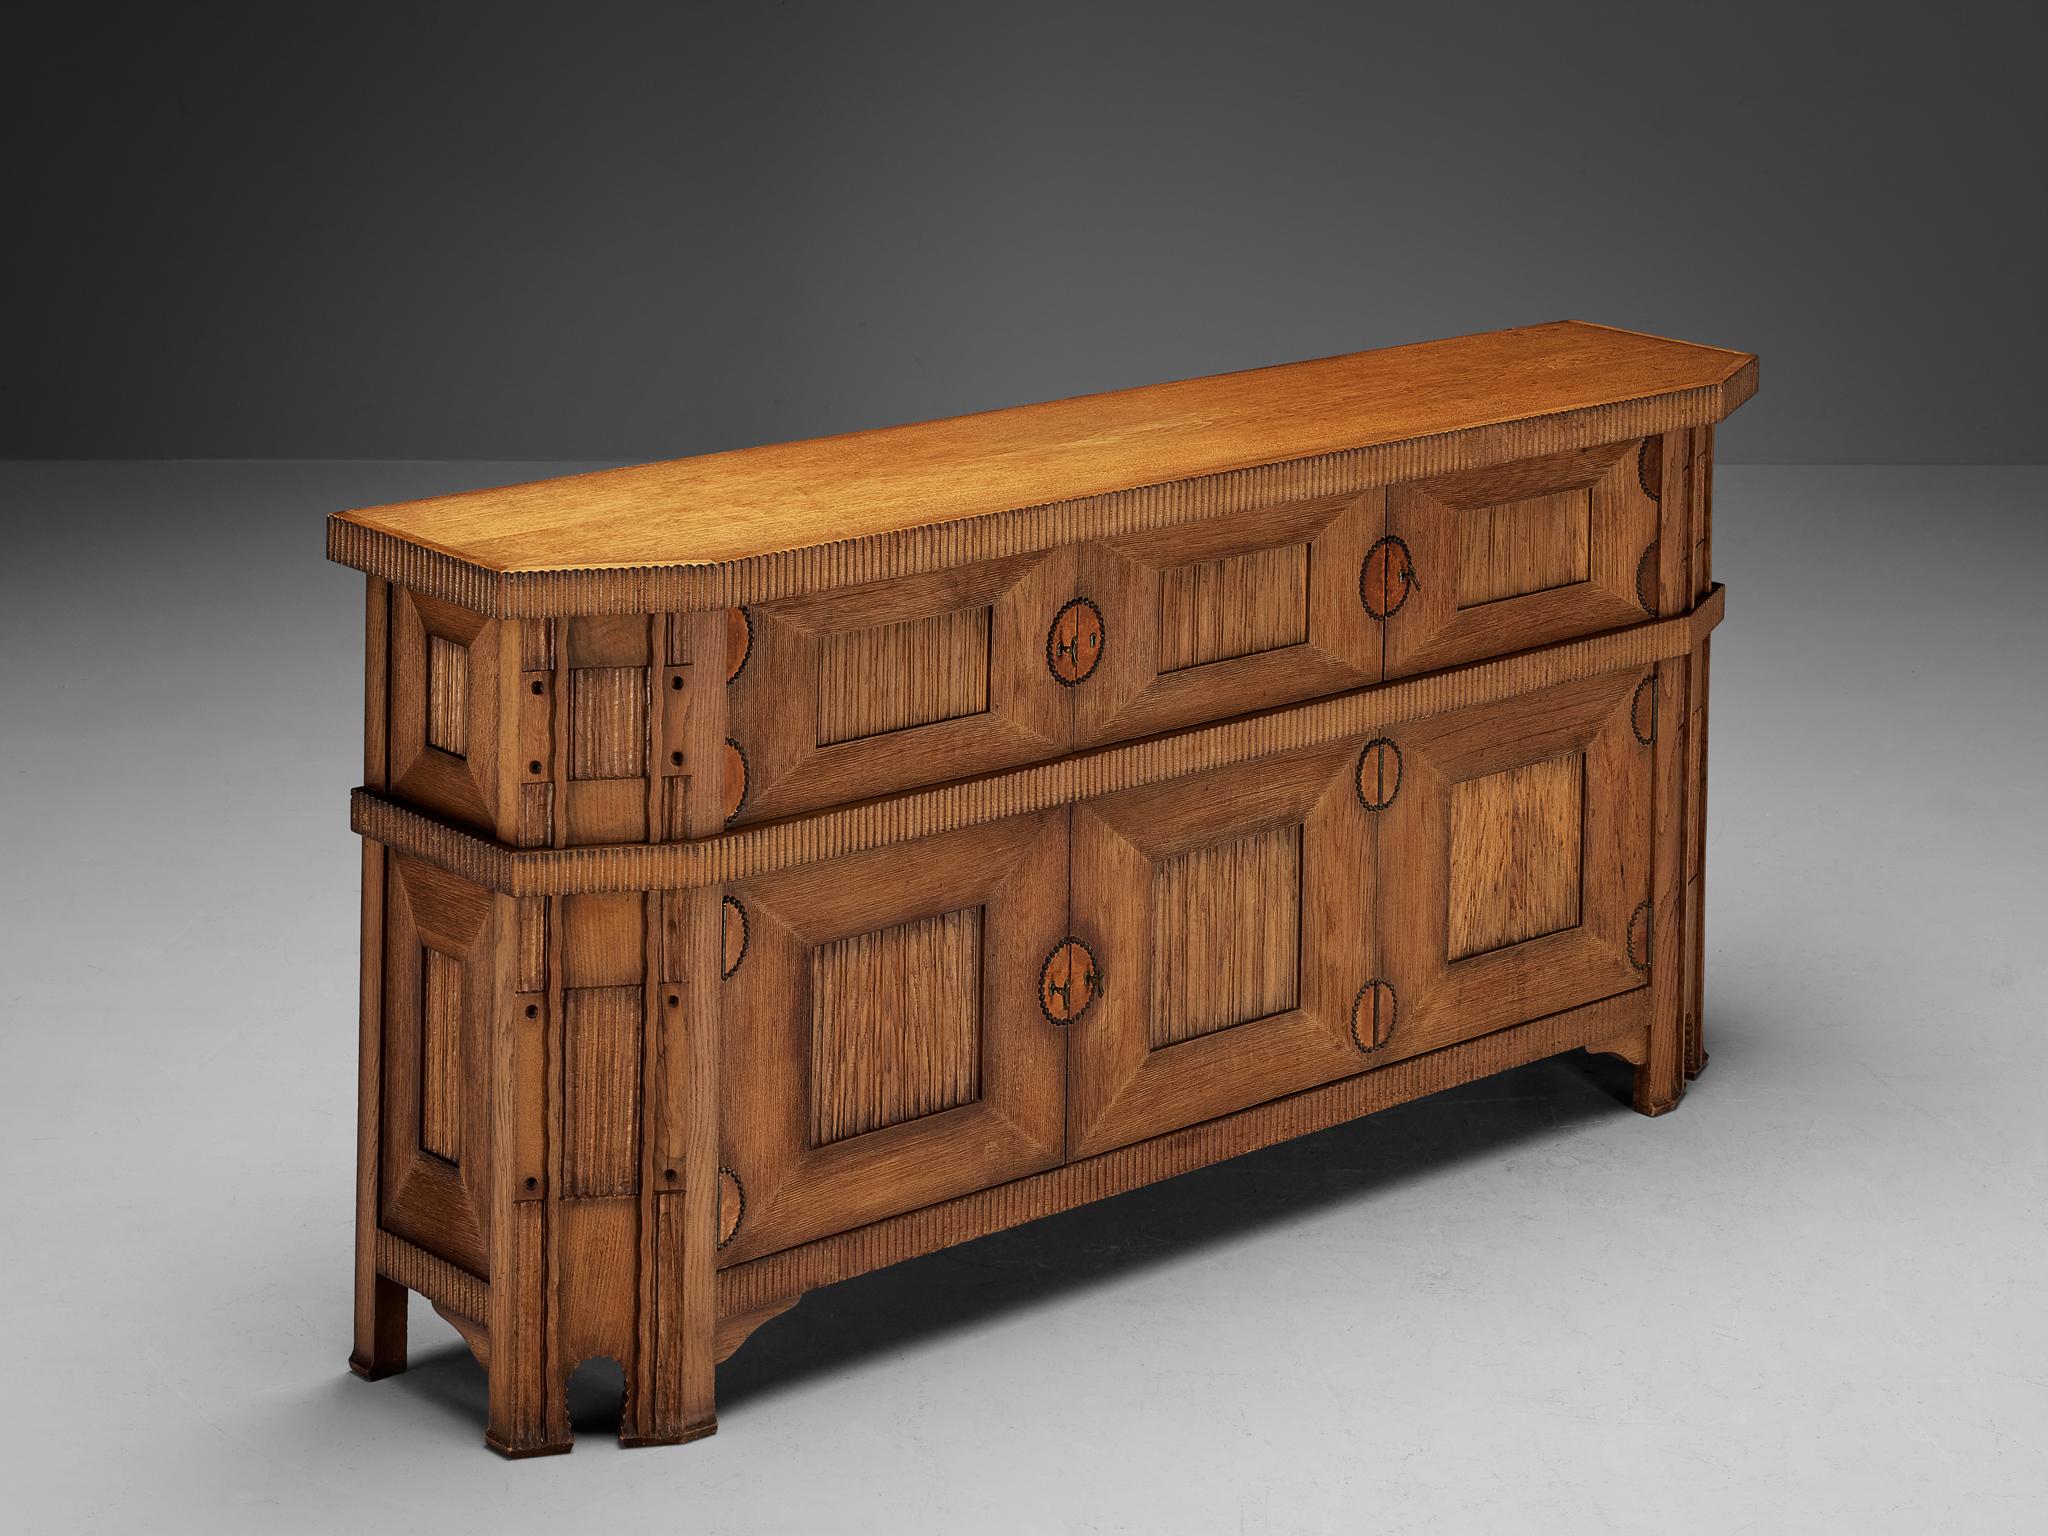 Vittorio Valabrega, sideboard, oak, leather, brass, Italy, 1930s

This large Art Deco sideboard in oak by Vittorio Valabrega features not only visual qualities but also great storage space. Five doors are structuring the outside and are furnished